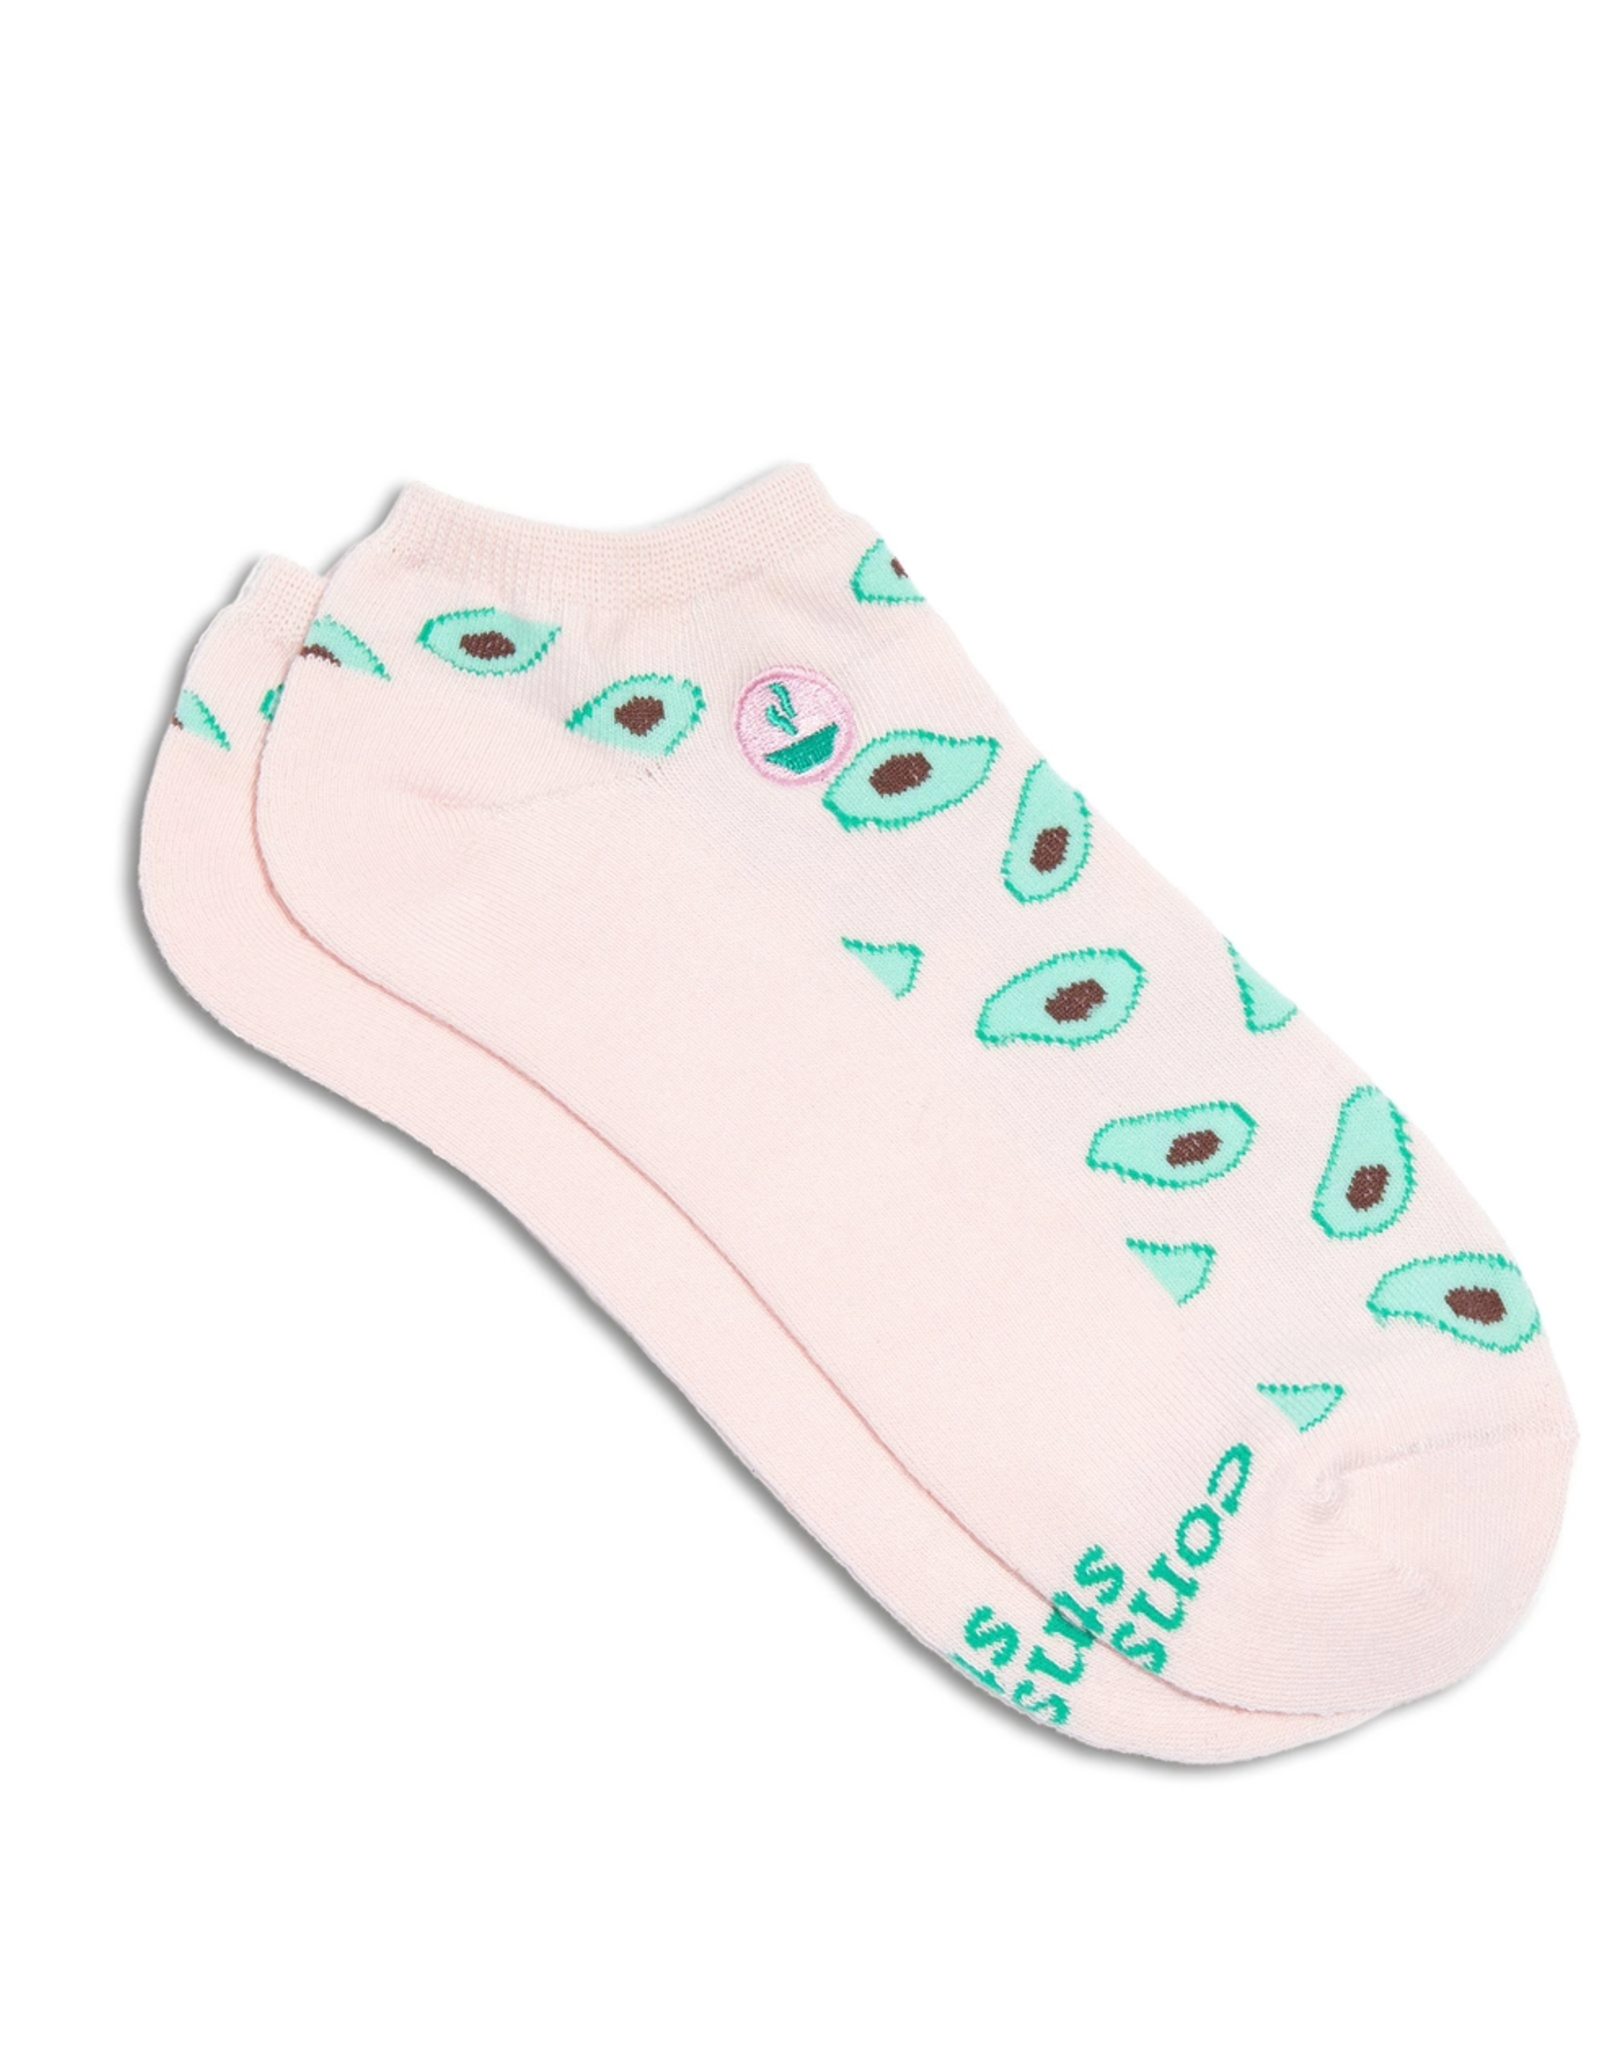 Conscious Step Ankle Socks That Provide Meals (Pink Avocados)